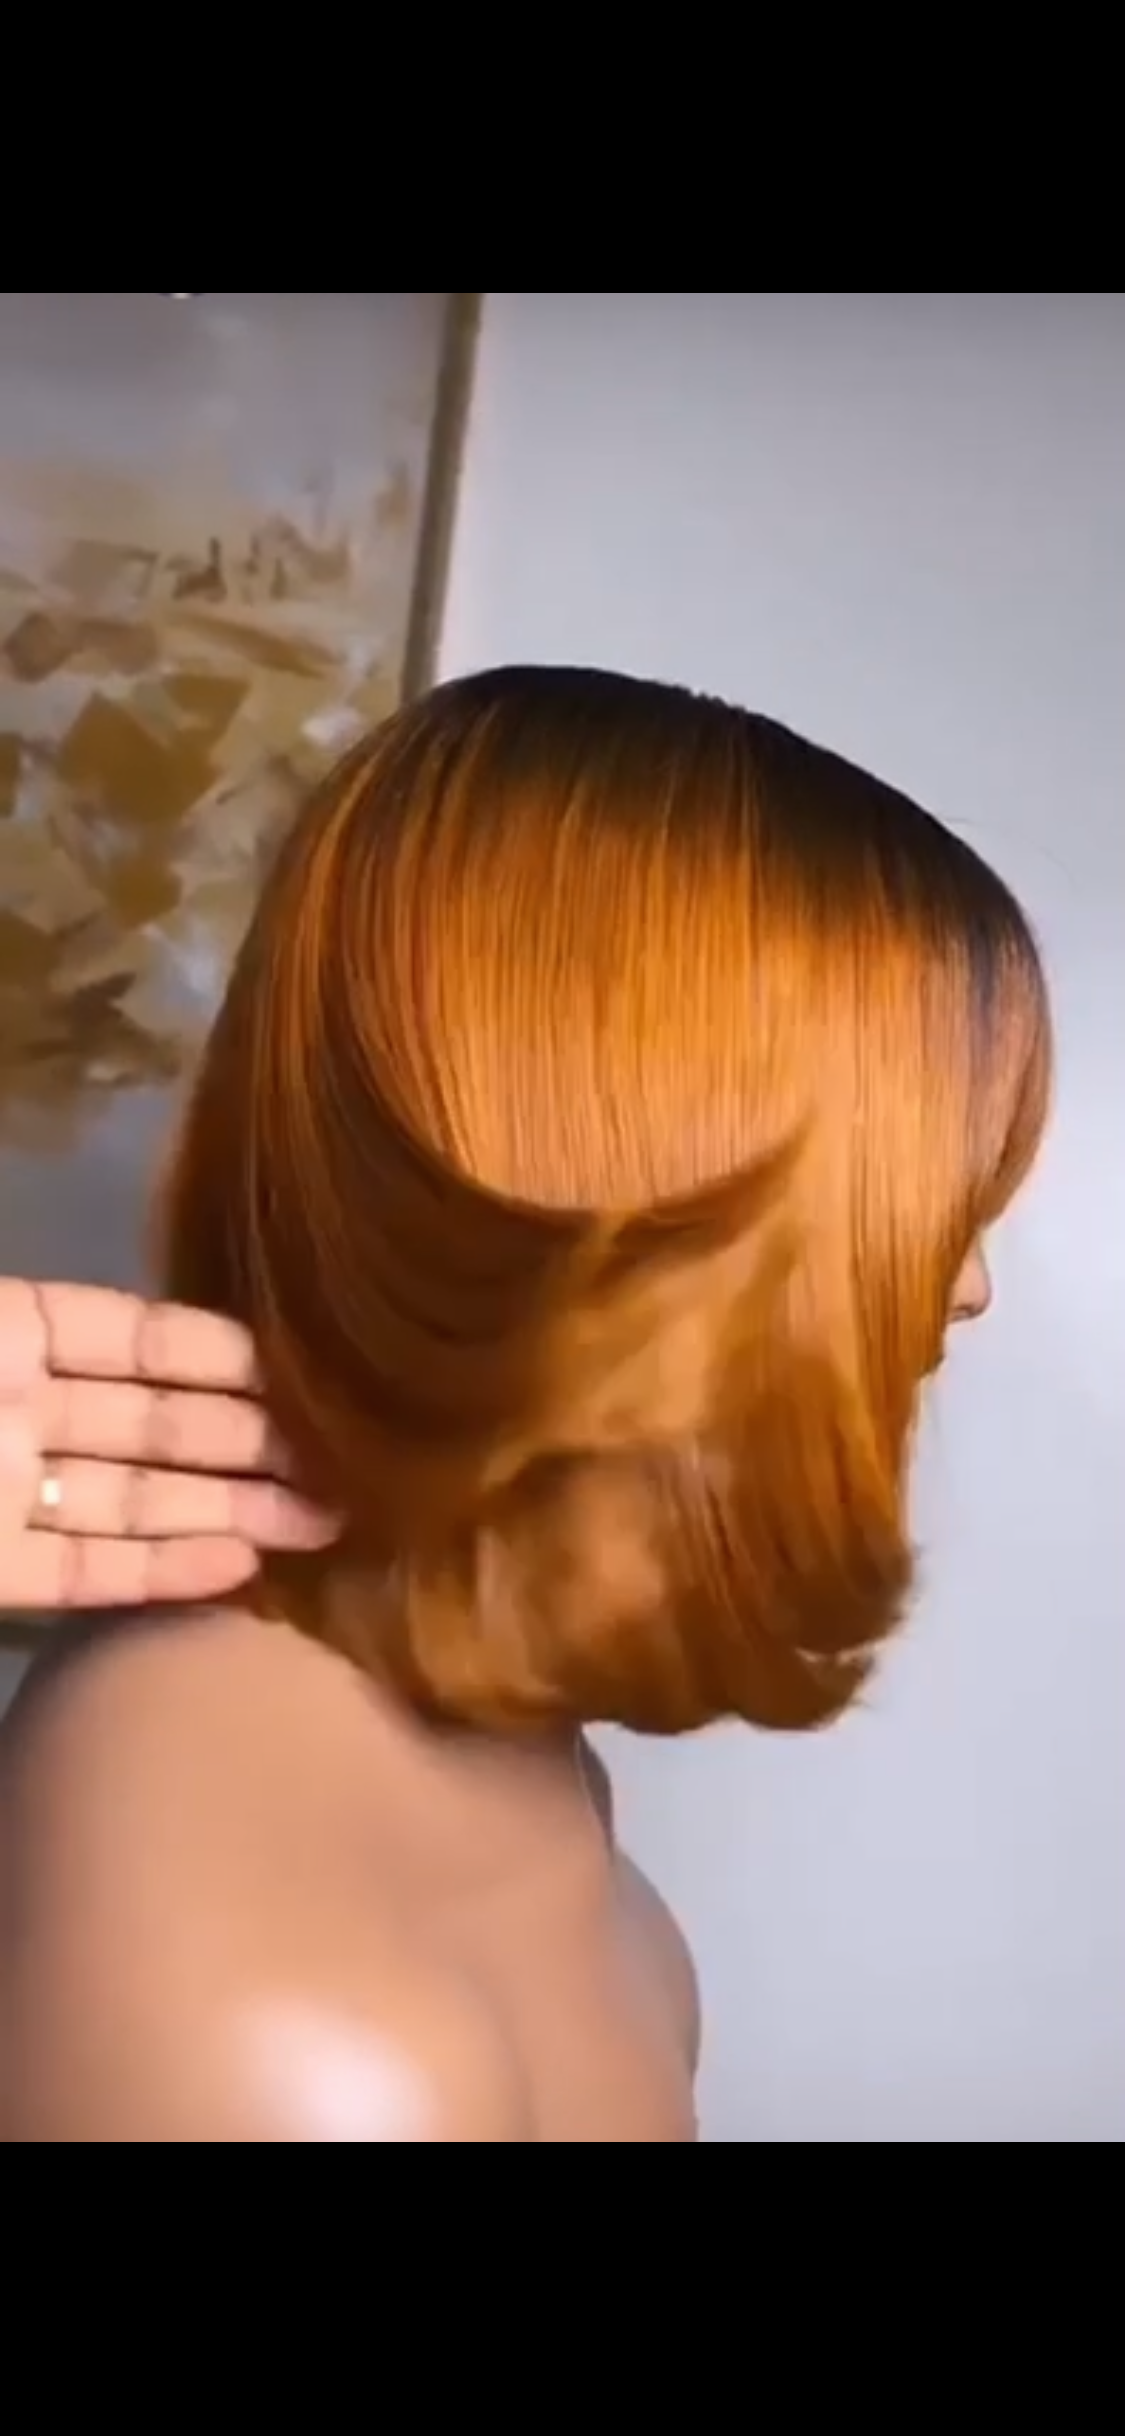 Two-Toned Bob with bangs